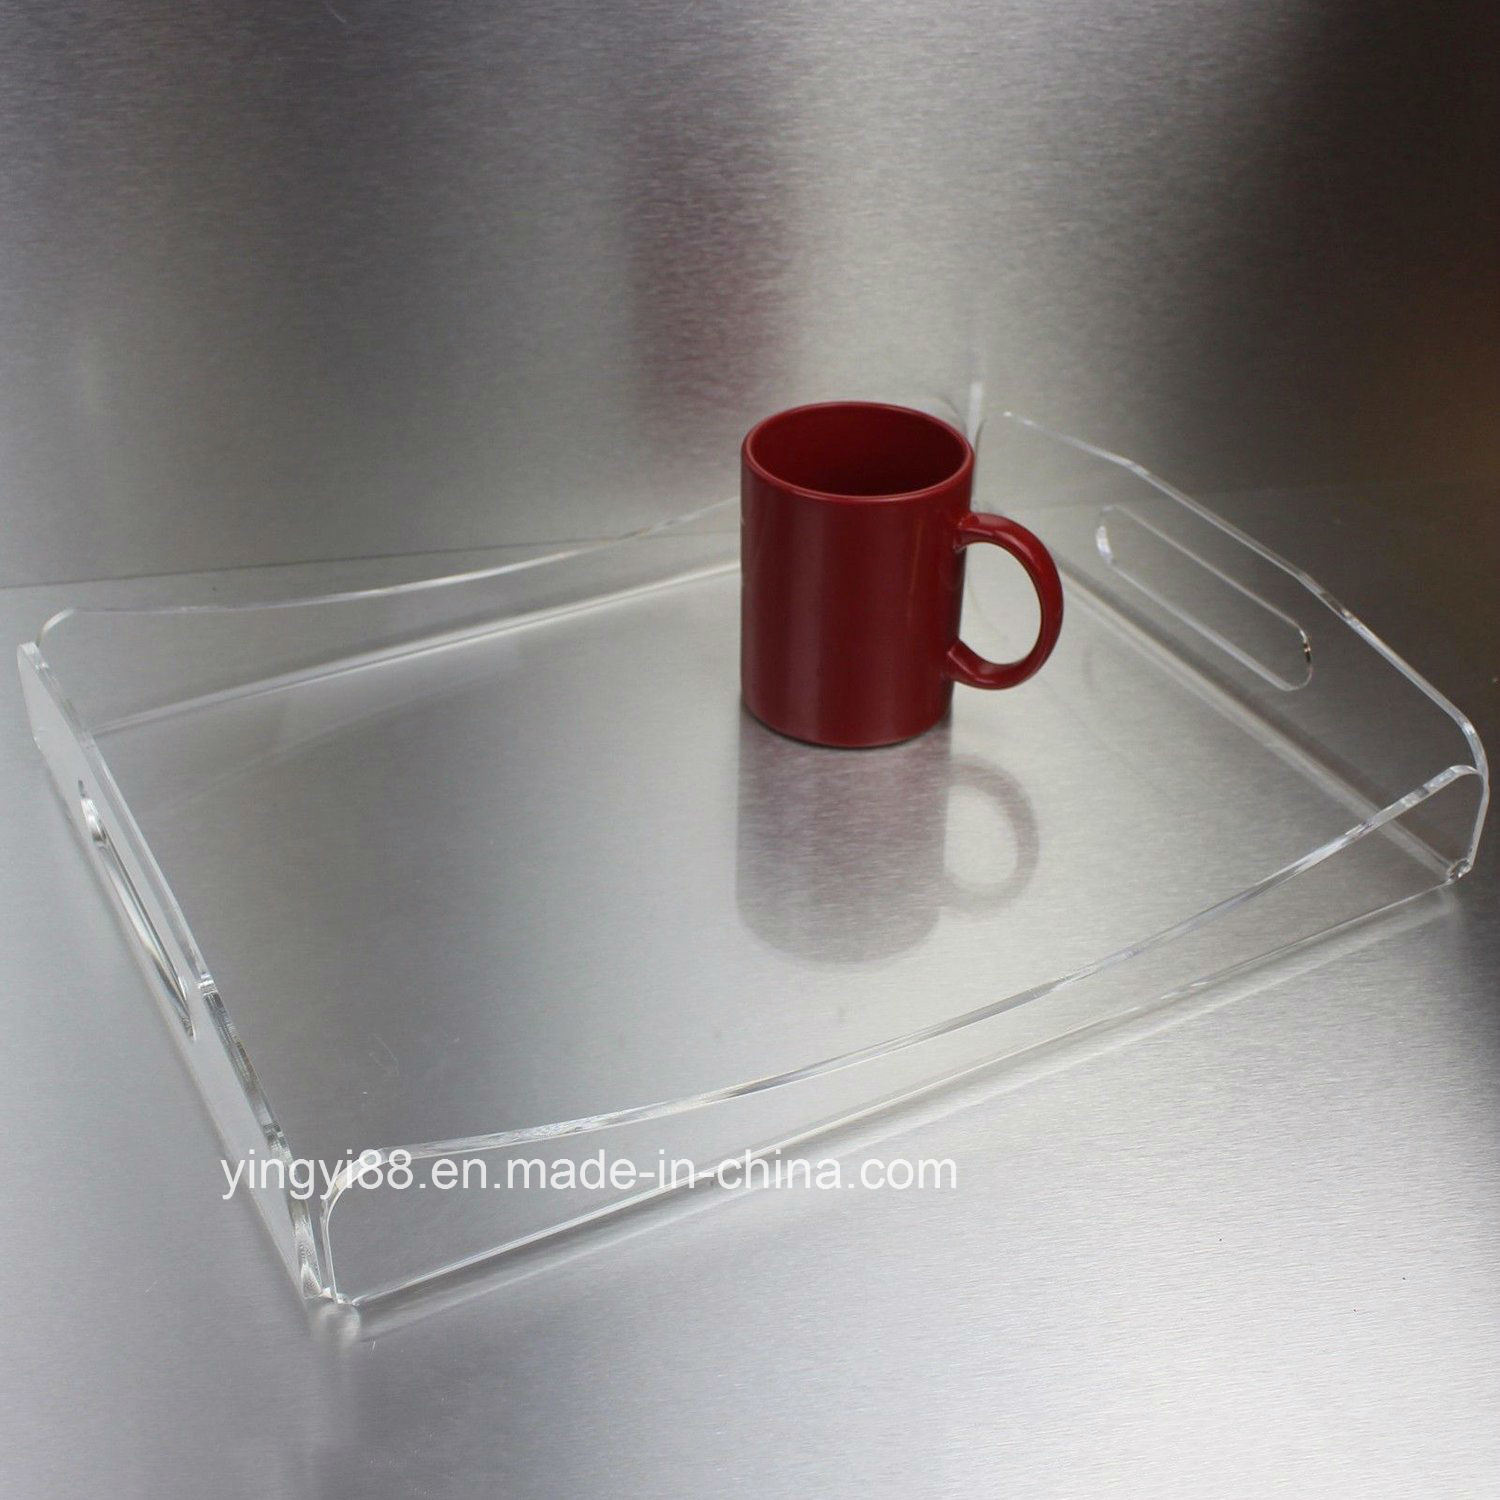 /proimages/2f0j00kNlQKpzbOagP/custom-clear-acrylic-plastic-serving-tray-for-cocktails-drink-food-party-bar.jpg